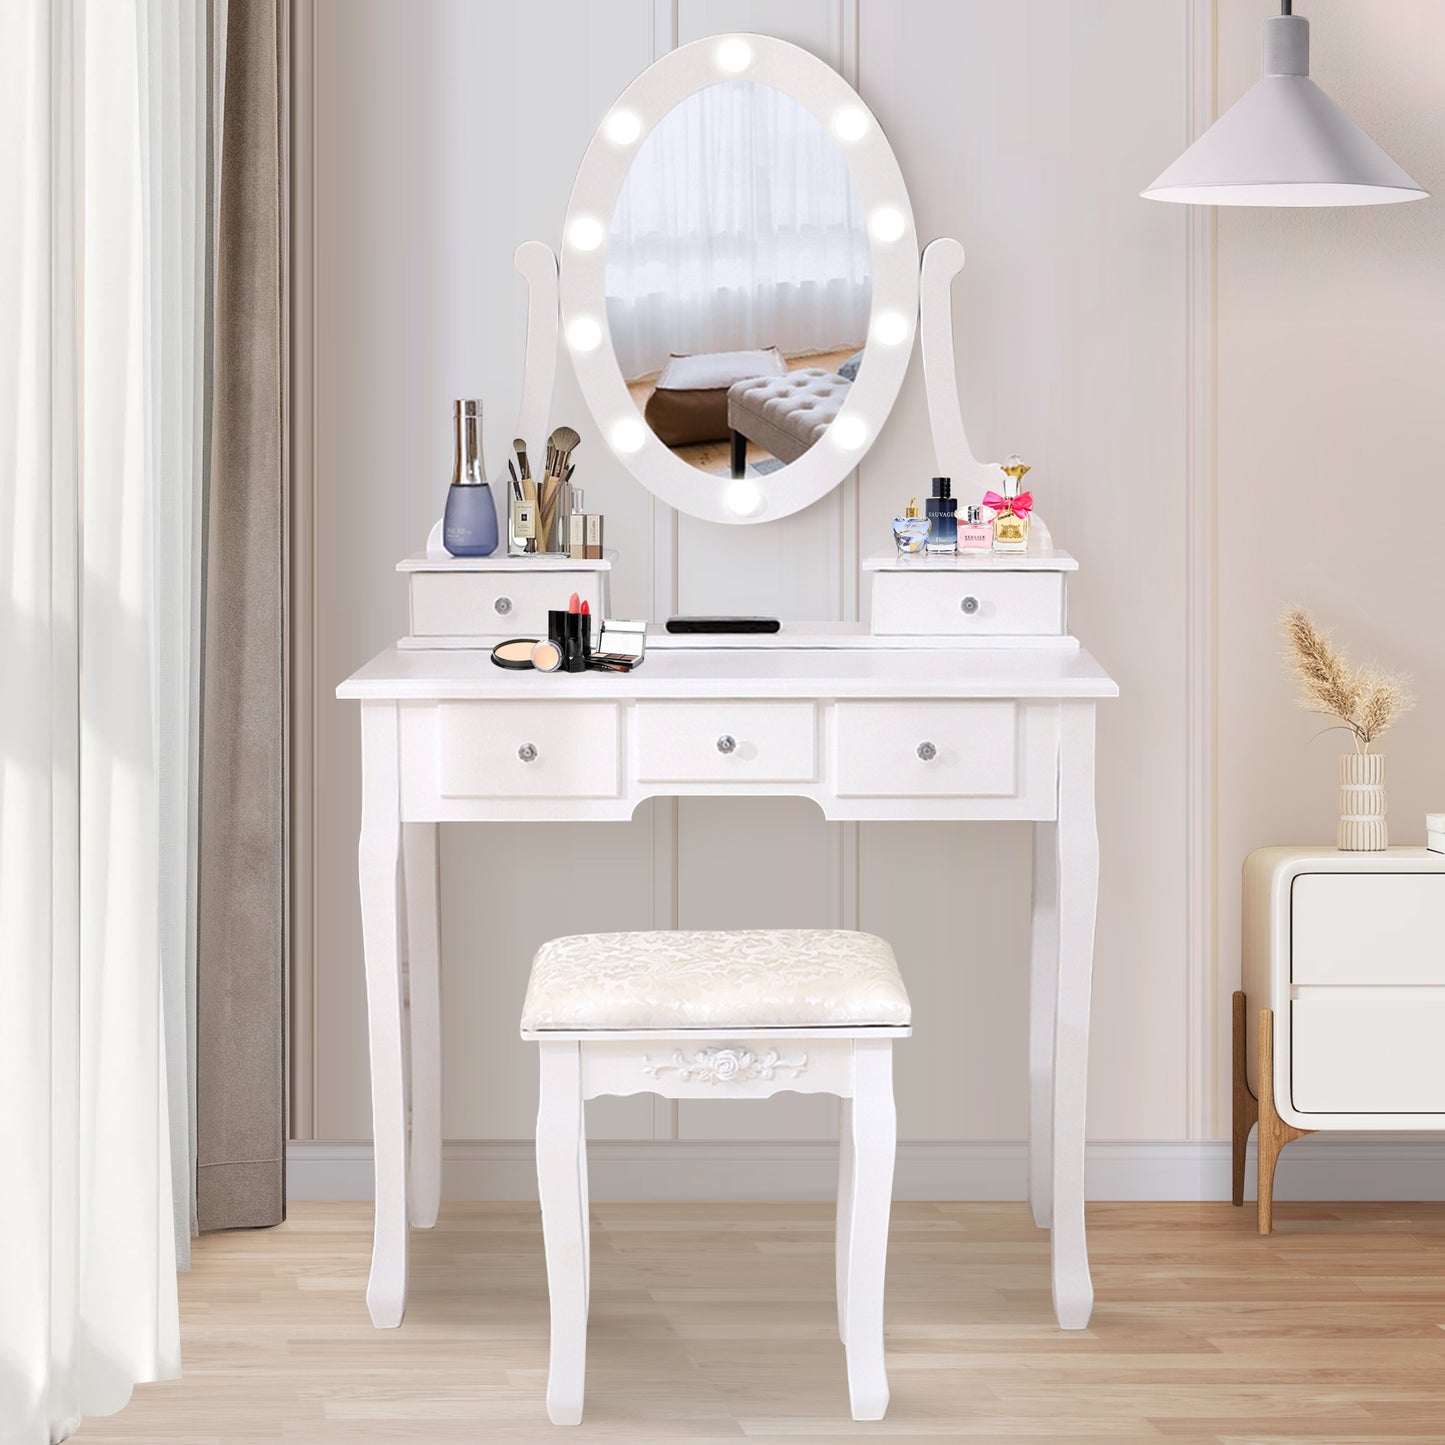 HSUNNS Vanity Set with Mirror, 2 Drawers Makeup Dressing Desk with Cushioned Stool Set, Vintage Style Makeup Vanity Table Desk with Large Mirror, Bedroom Vanities Set for Women and Girls, White